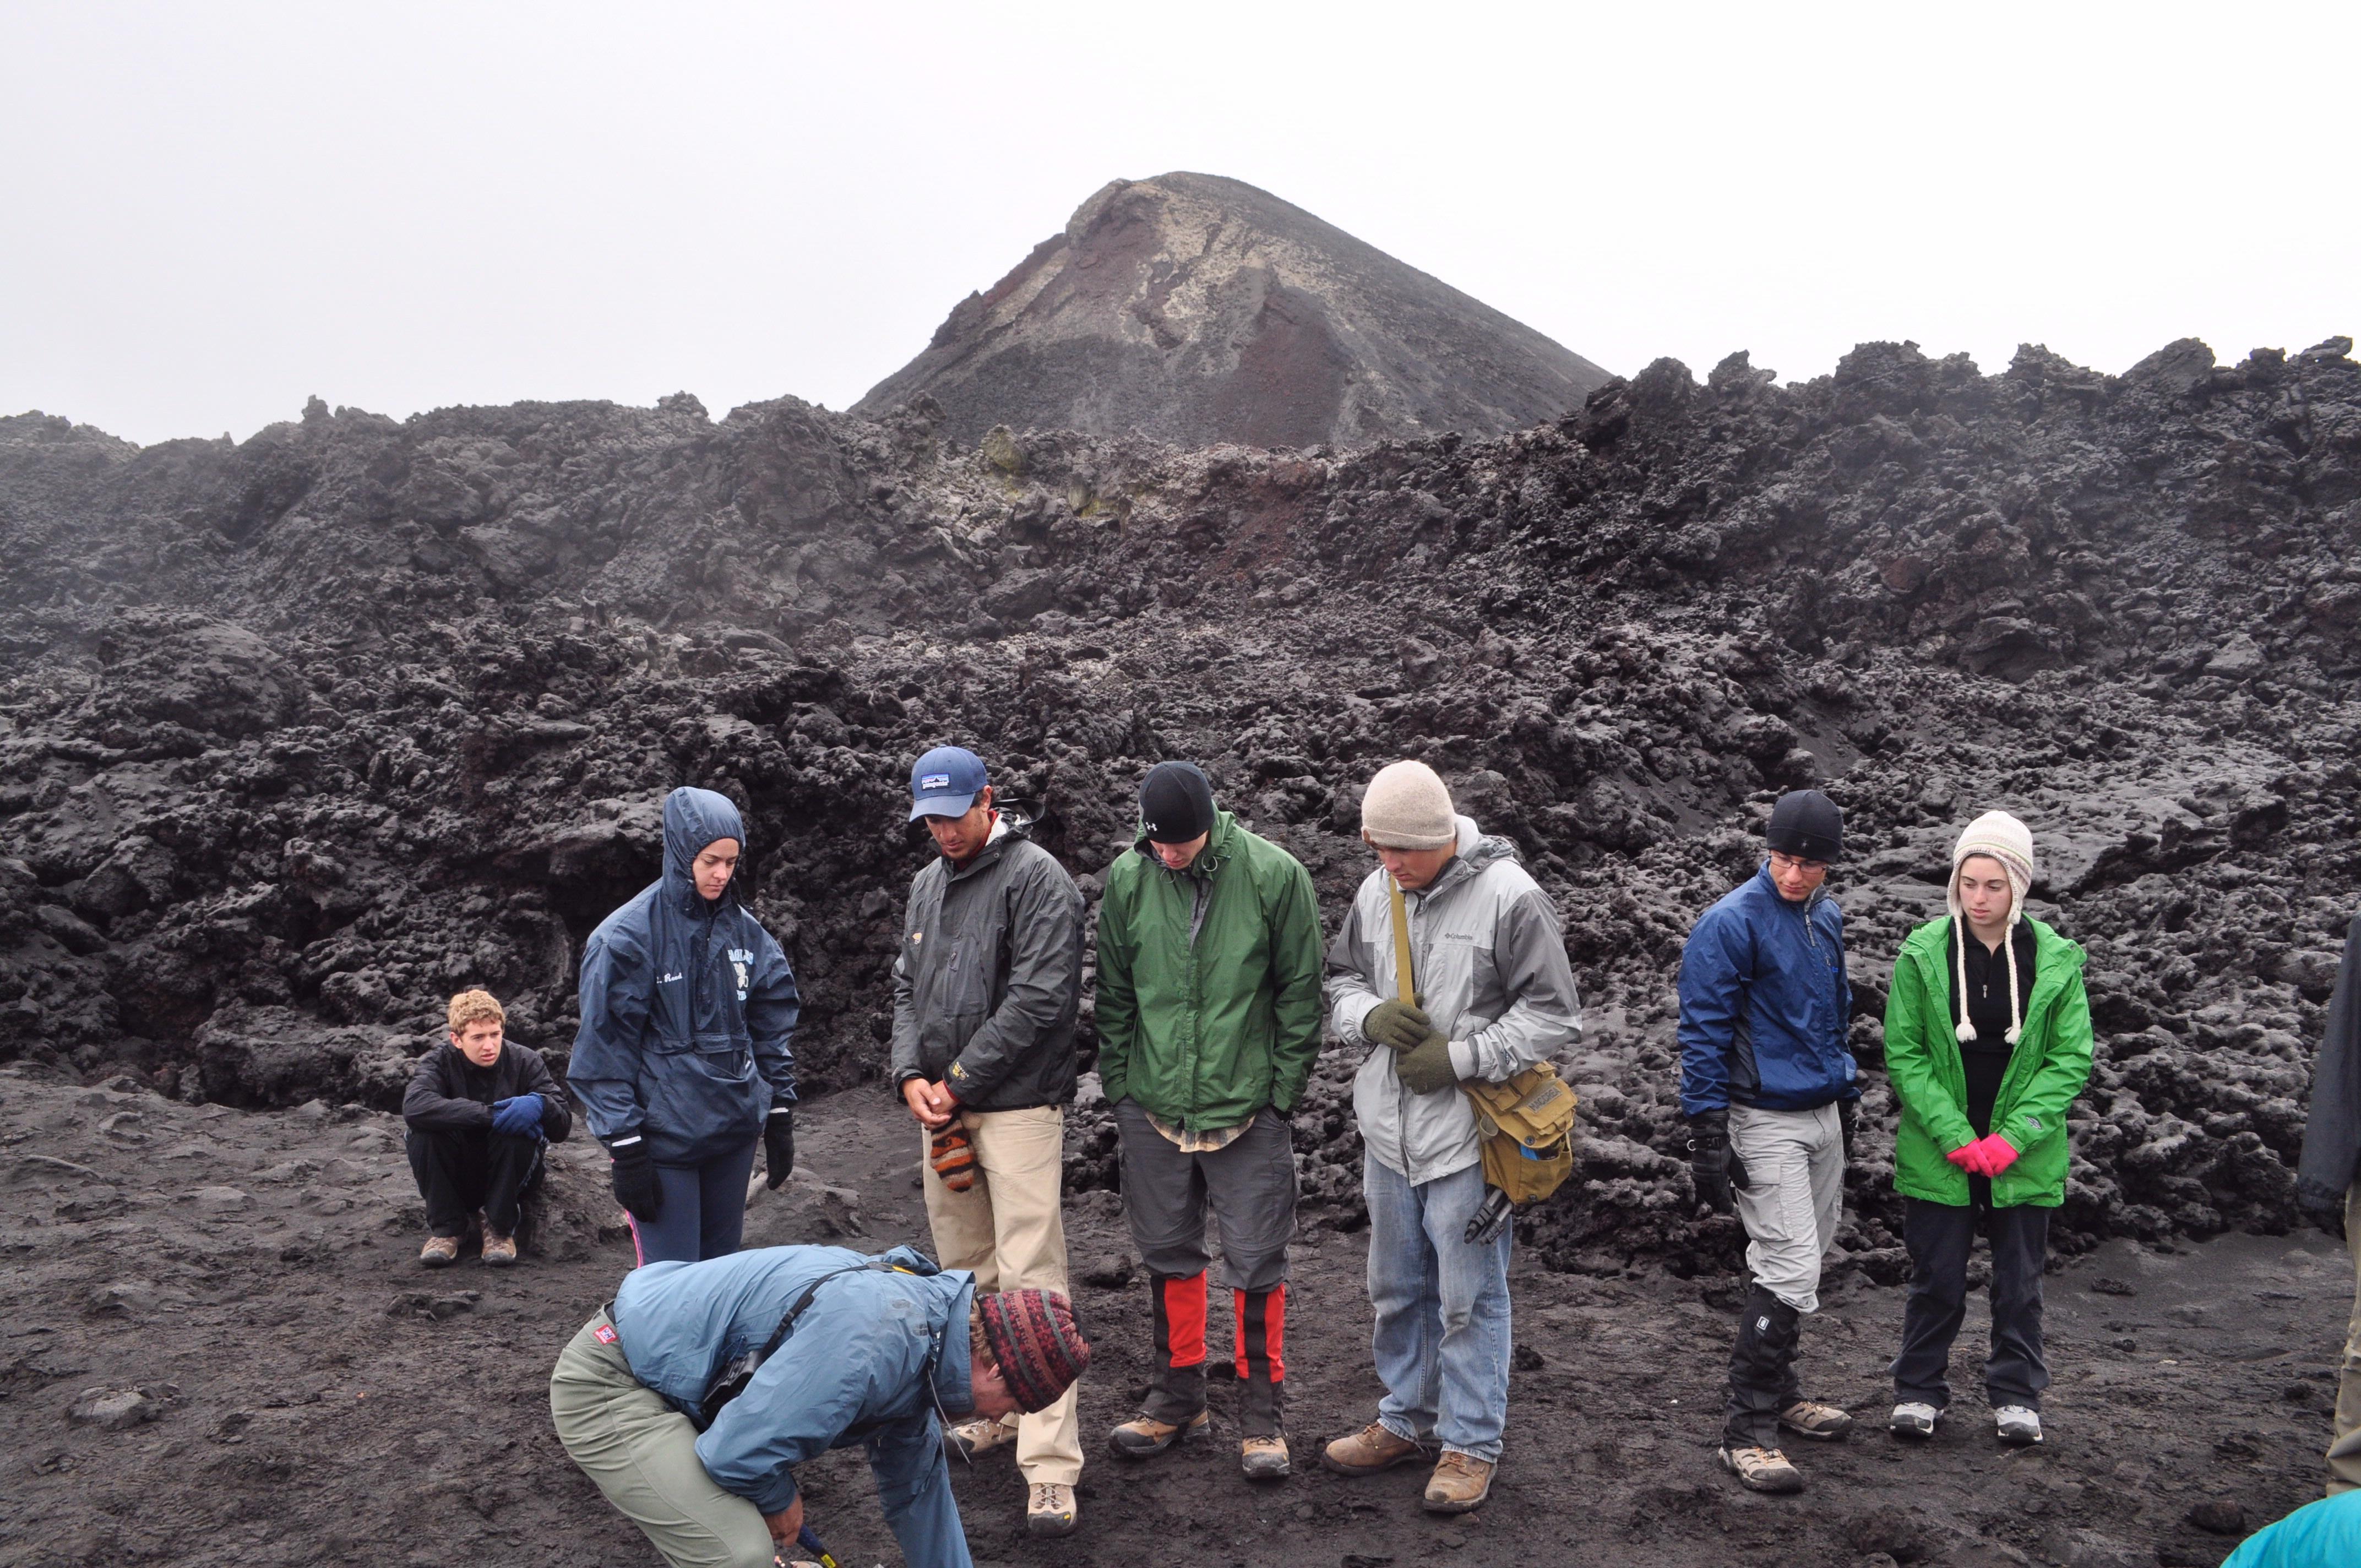 The group at the site of the 2010 eruption in Fimmvörðuháls.